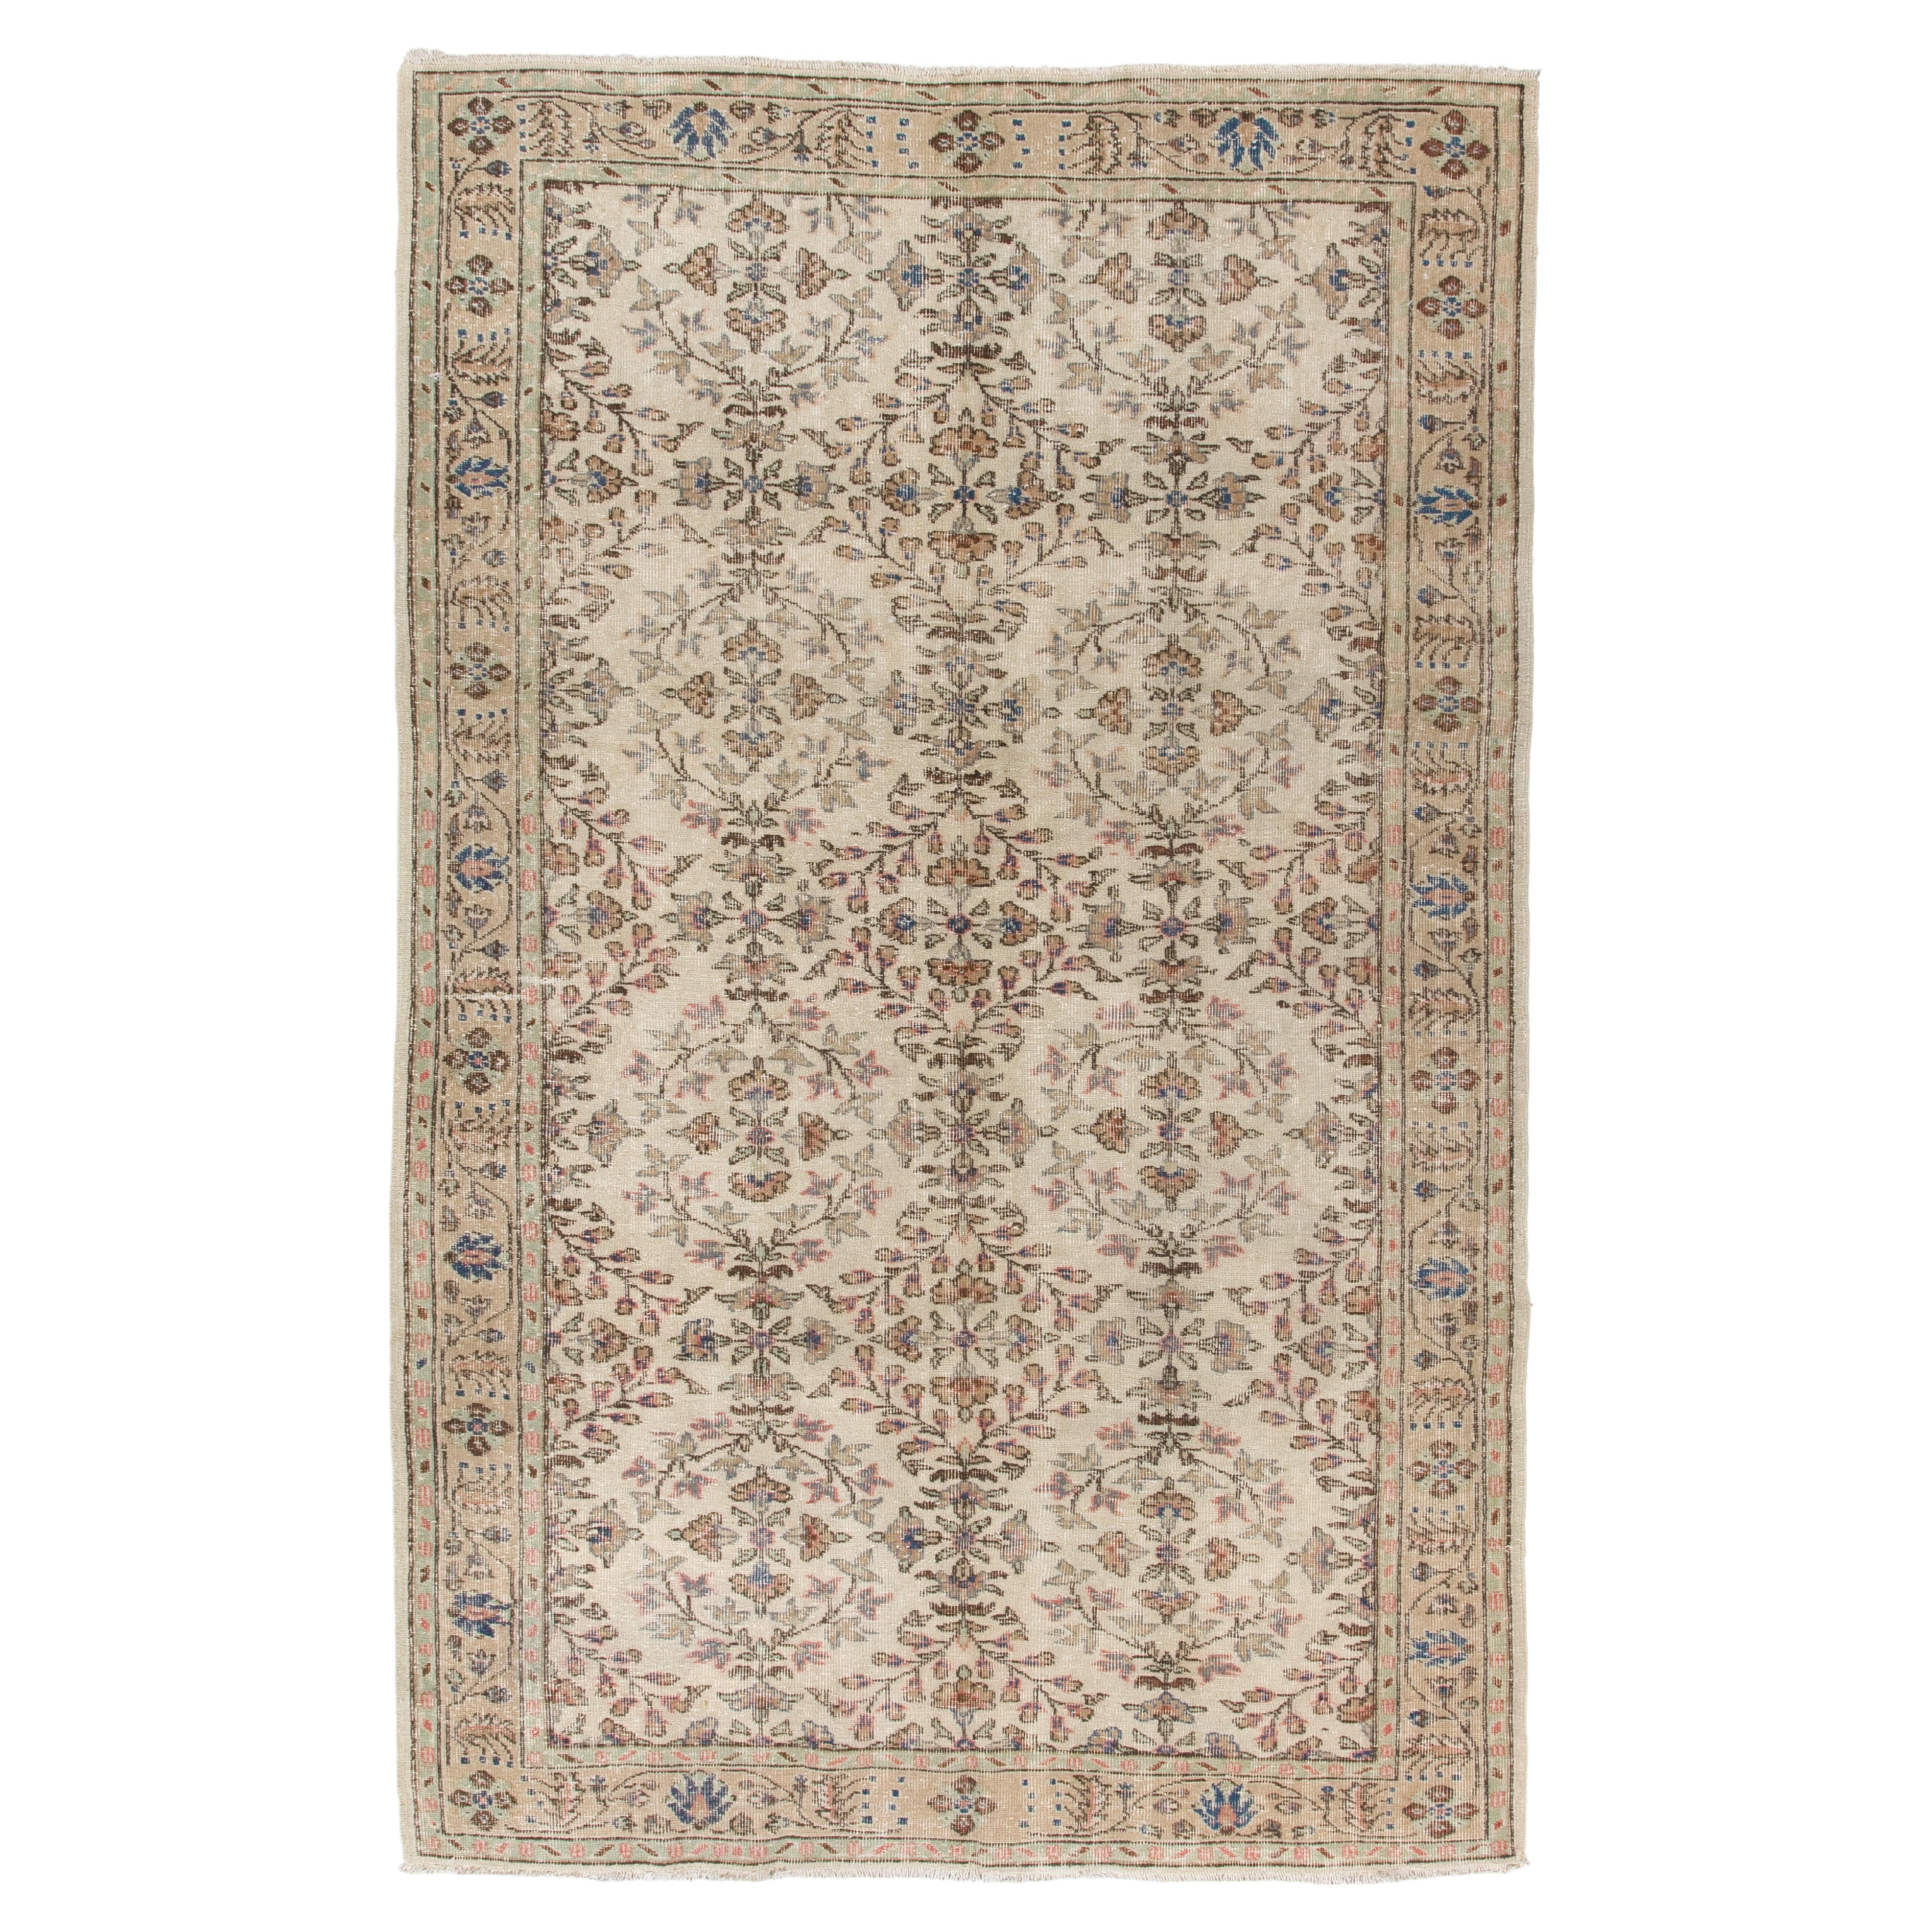 6x9 Ft Vintage Oushak Area Rug in Soft, Muted Colors, Wool Hand Knotted Carpet For Sale